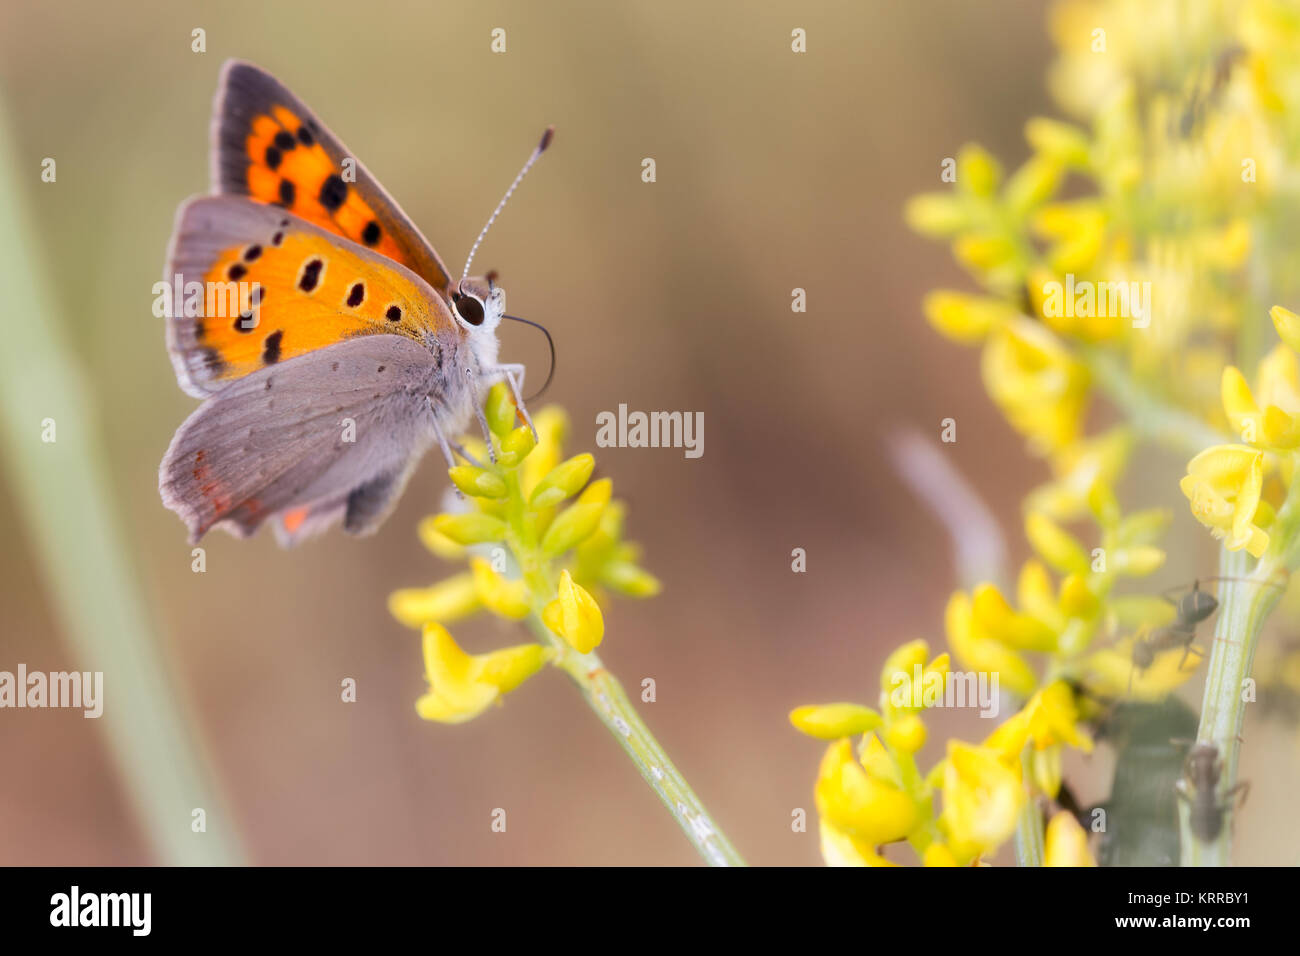 Lycaena phlaeas. Butterfly in their natural environment. Stock Photo